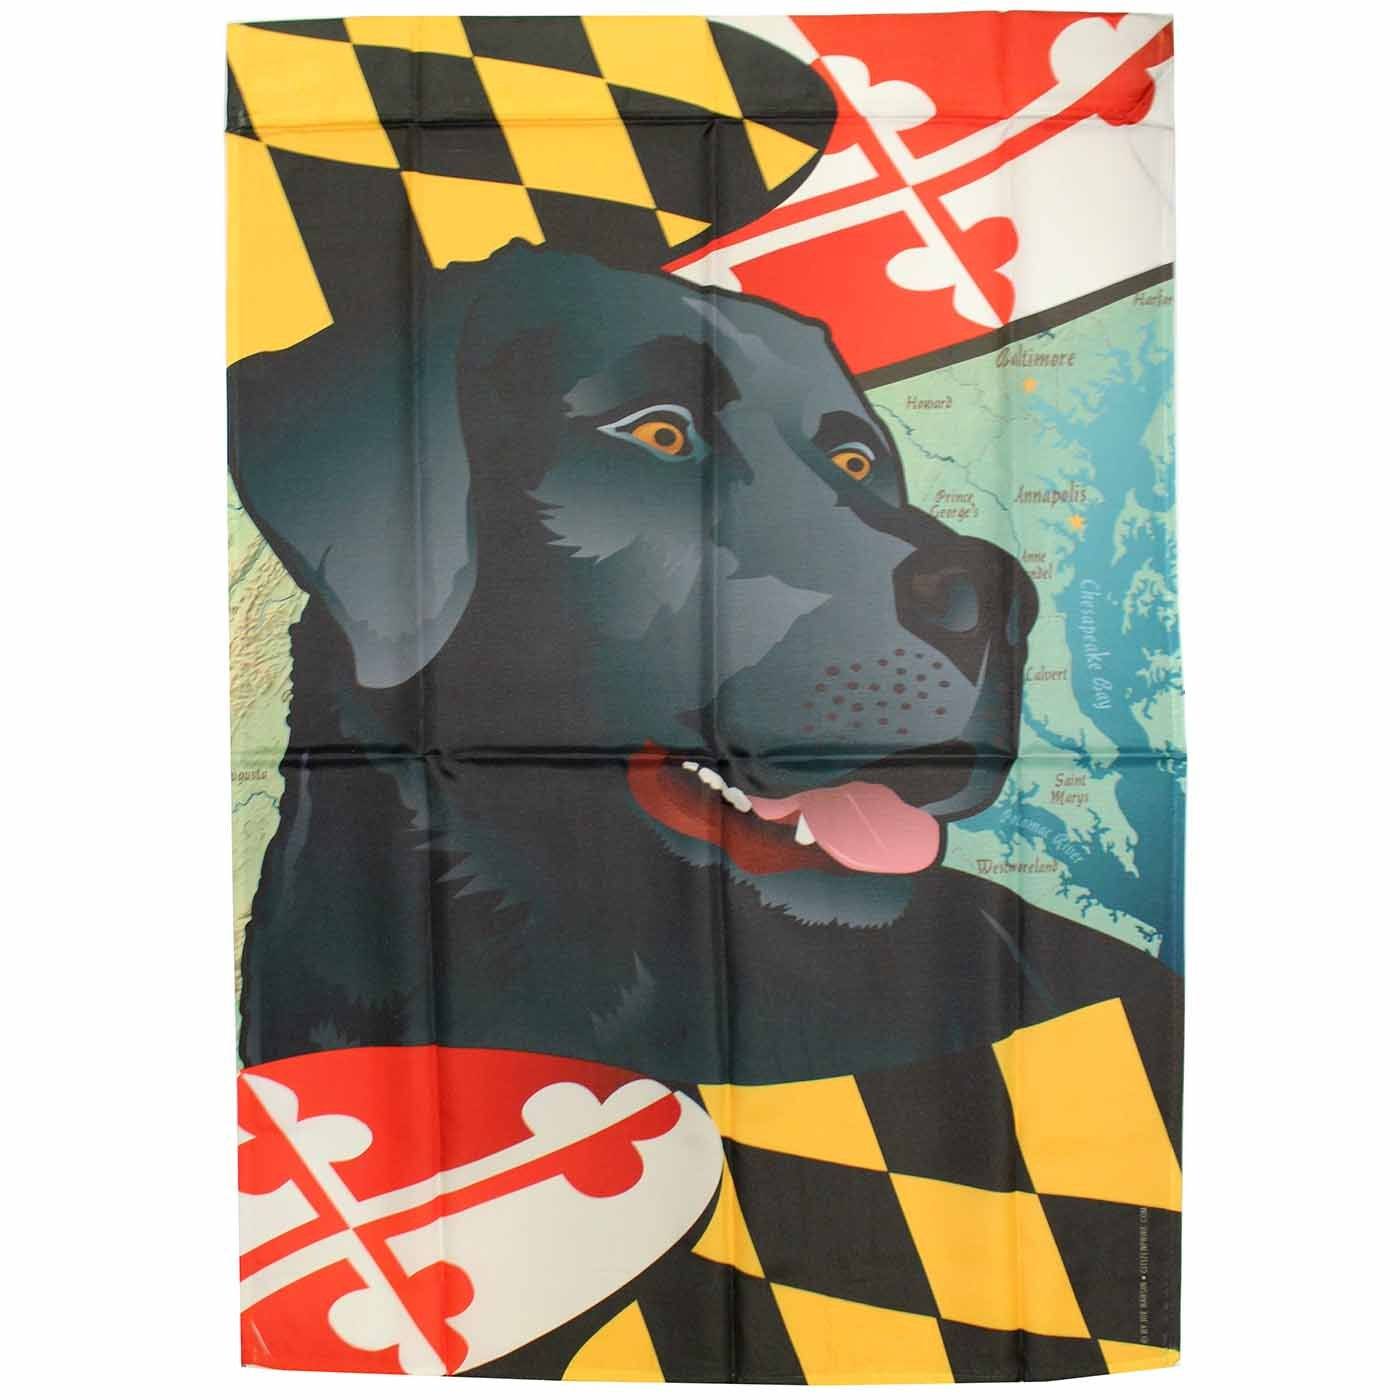 Maryland Black Lab / Garden Flag - Route One Apparel